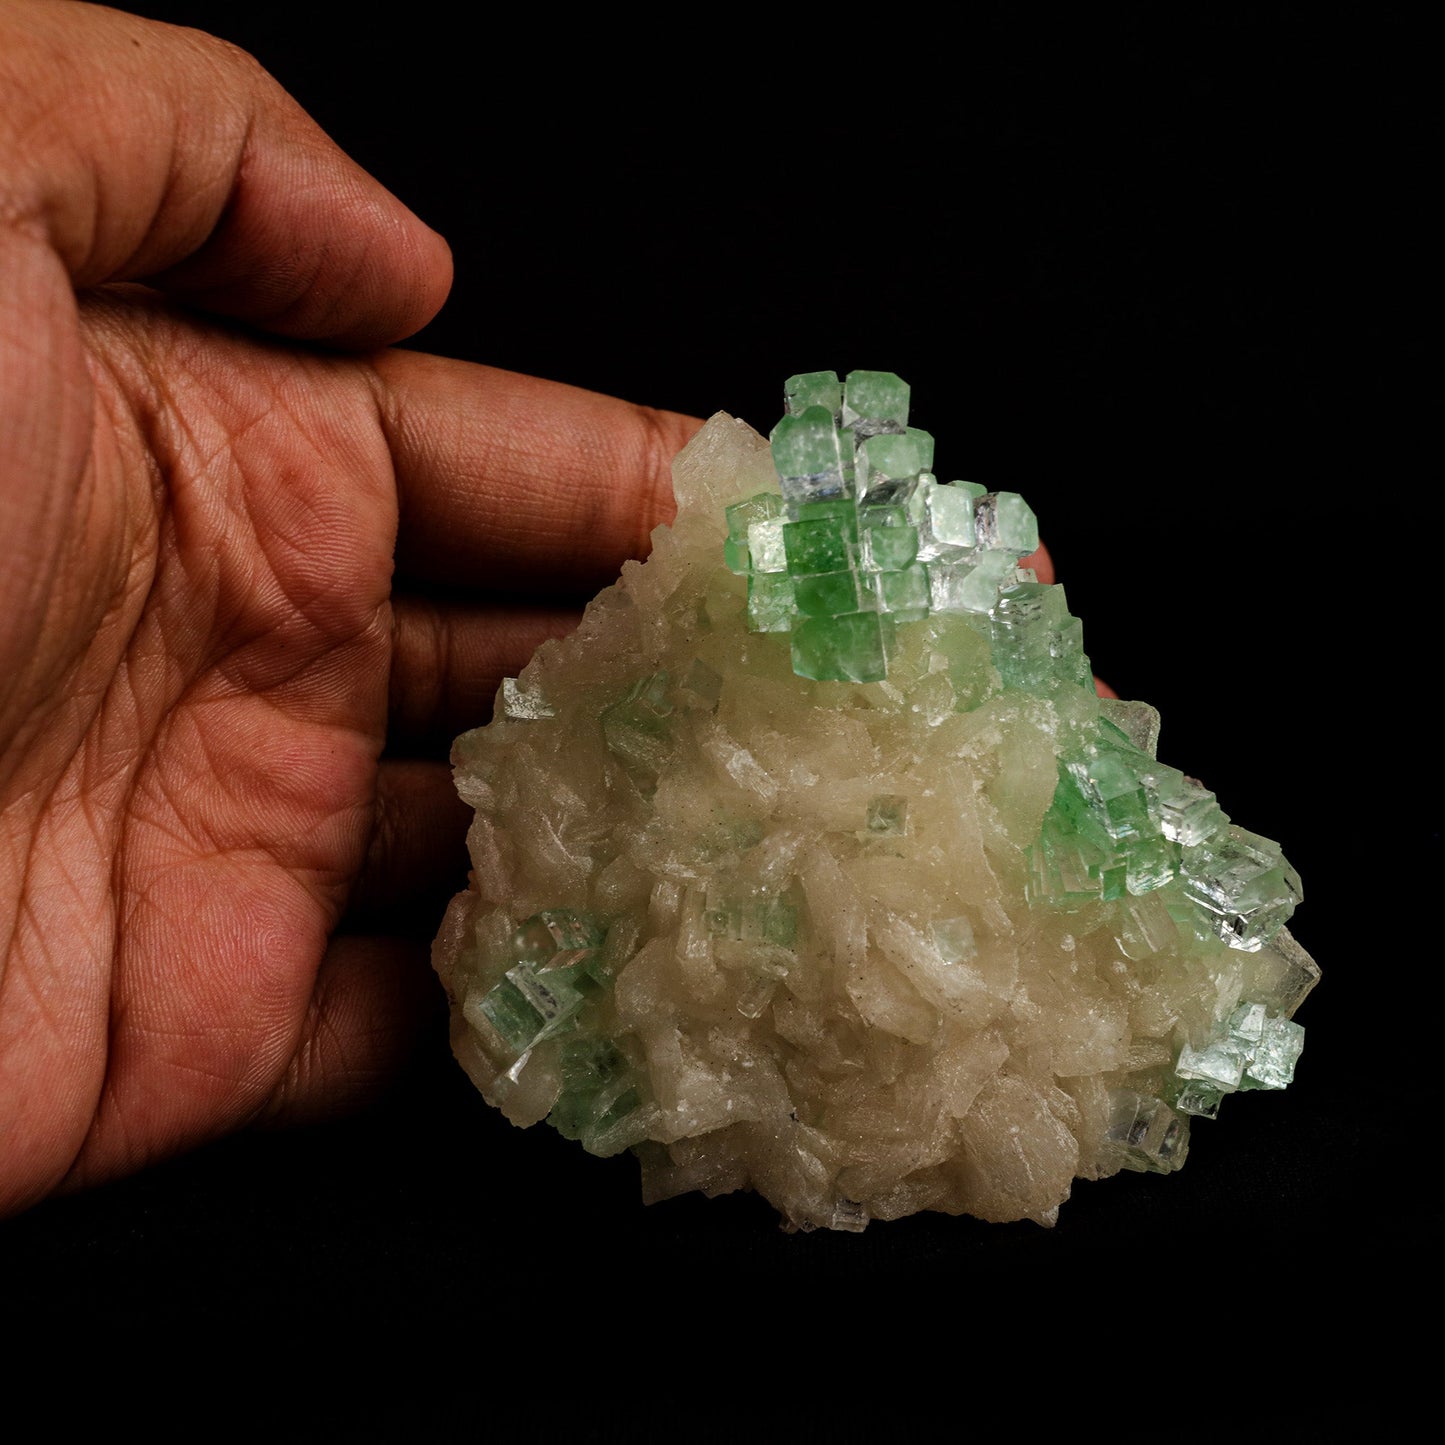 Green Apophyllite Disco Ball with Stilbite Natural Mineral Specimen #…  https://www.superbminerals.us/products/green-apophyllite-disco-ball-with-stilbite-natural-mineral-specimen-b-5125  Features: The finding of these spectacular fluorapophyllite "disco balls" while excavating huge diameter water wells is without a doubt one of the Deccan Traps' Great Finds.A "small ball" over... "ball" of densely intergrown, gemmy, highly glassy, mint-green to colourless tetragonal crystals with pinacoidal termination